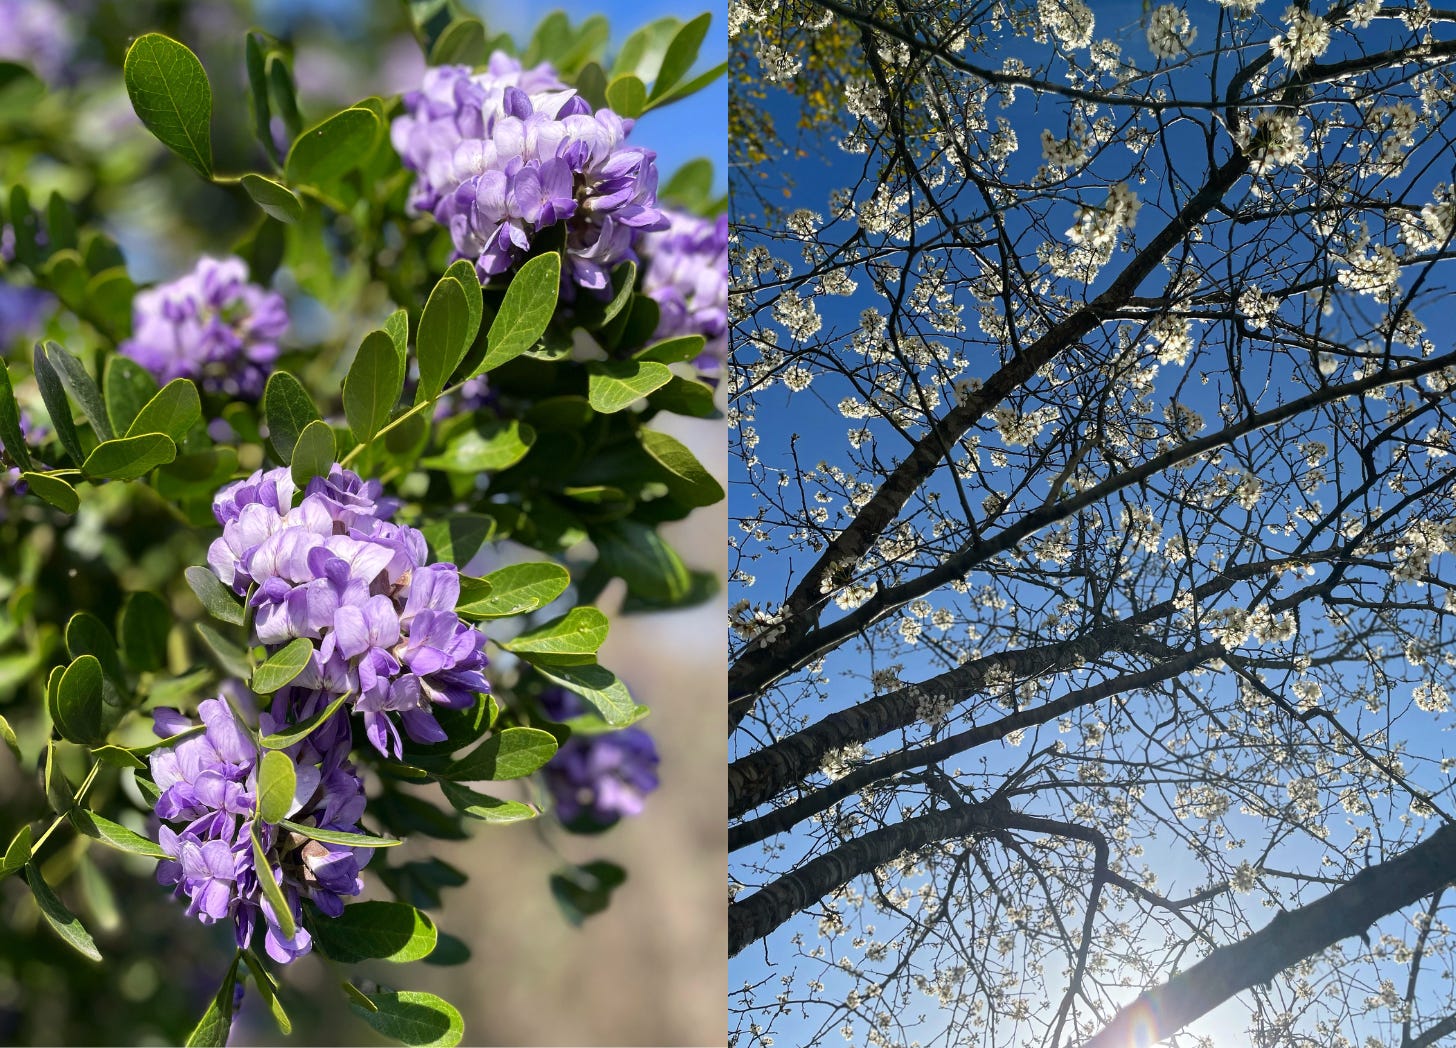 Two photos side by side. The first photo is a close-up of purple Texas Mountain Laurel blooms. The second photo depicts tree branches with white blossoms against a blue sky.